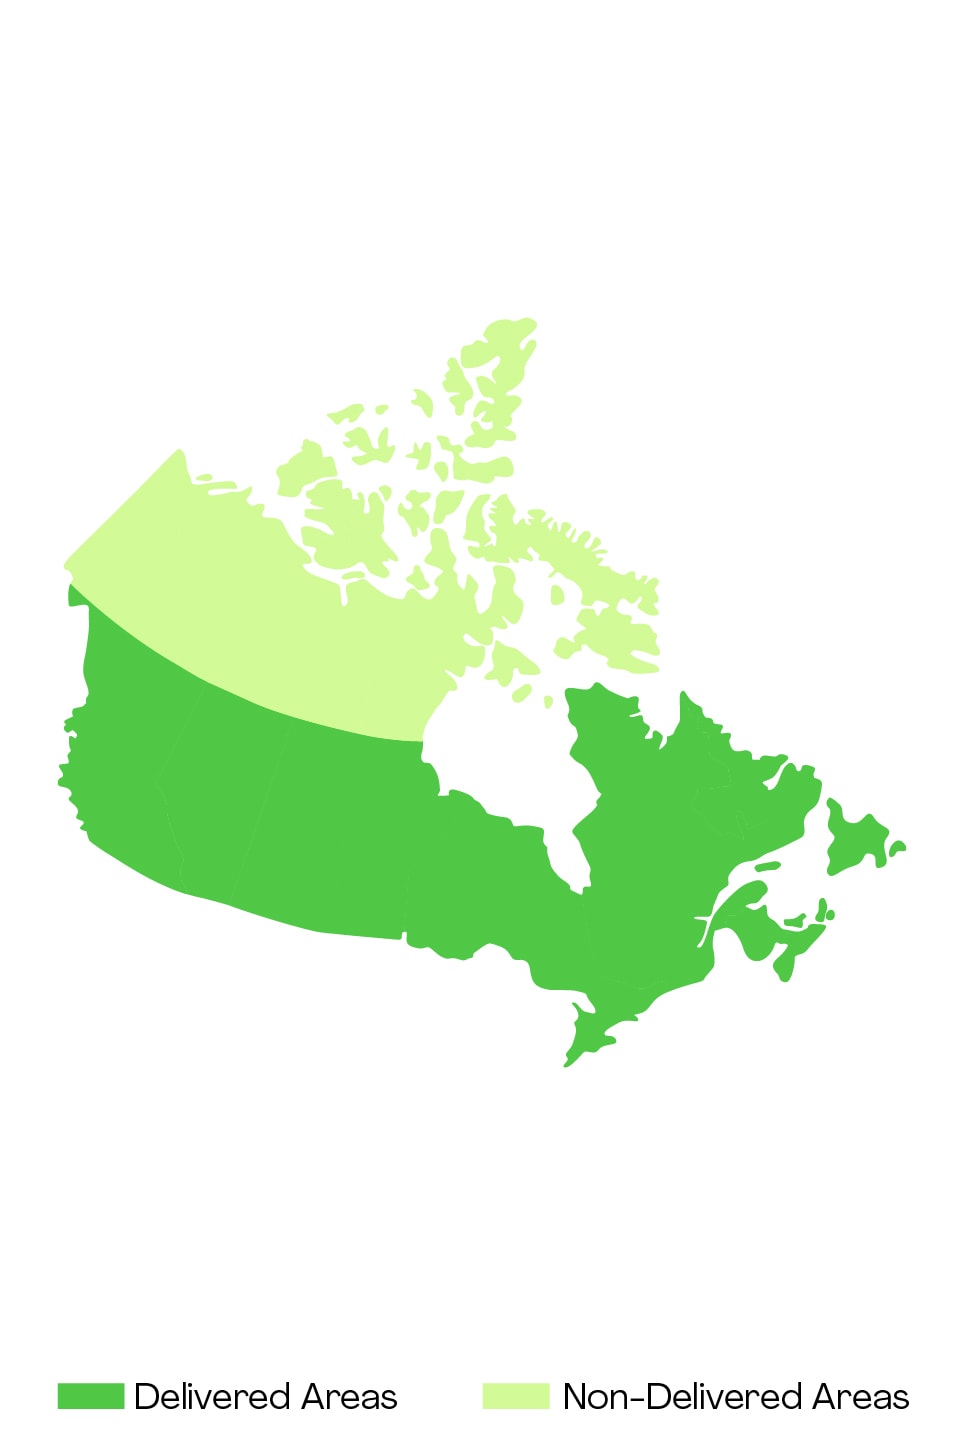 <h2>Meal plans delivery areas in Canada</h2>